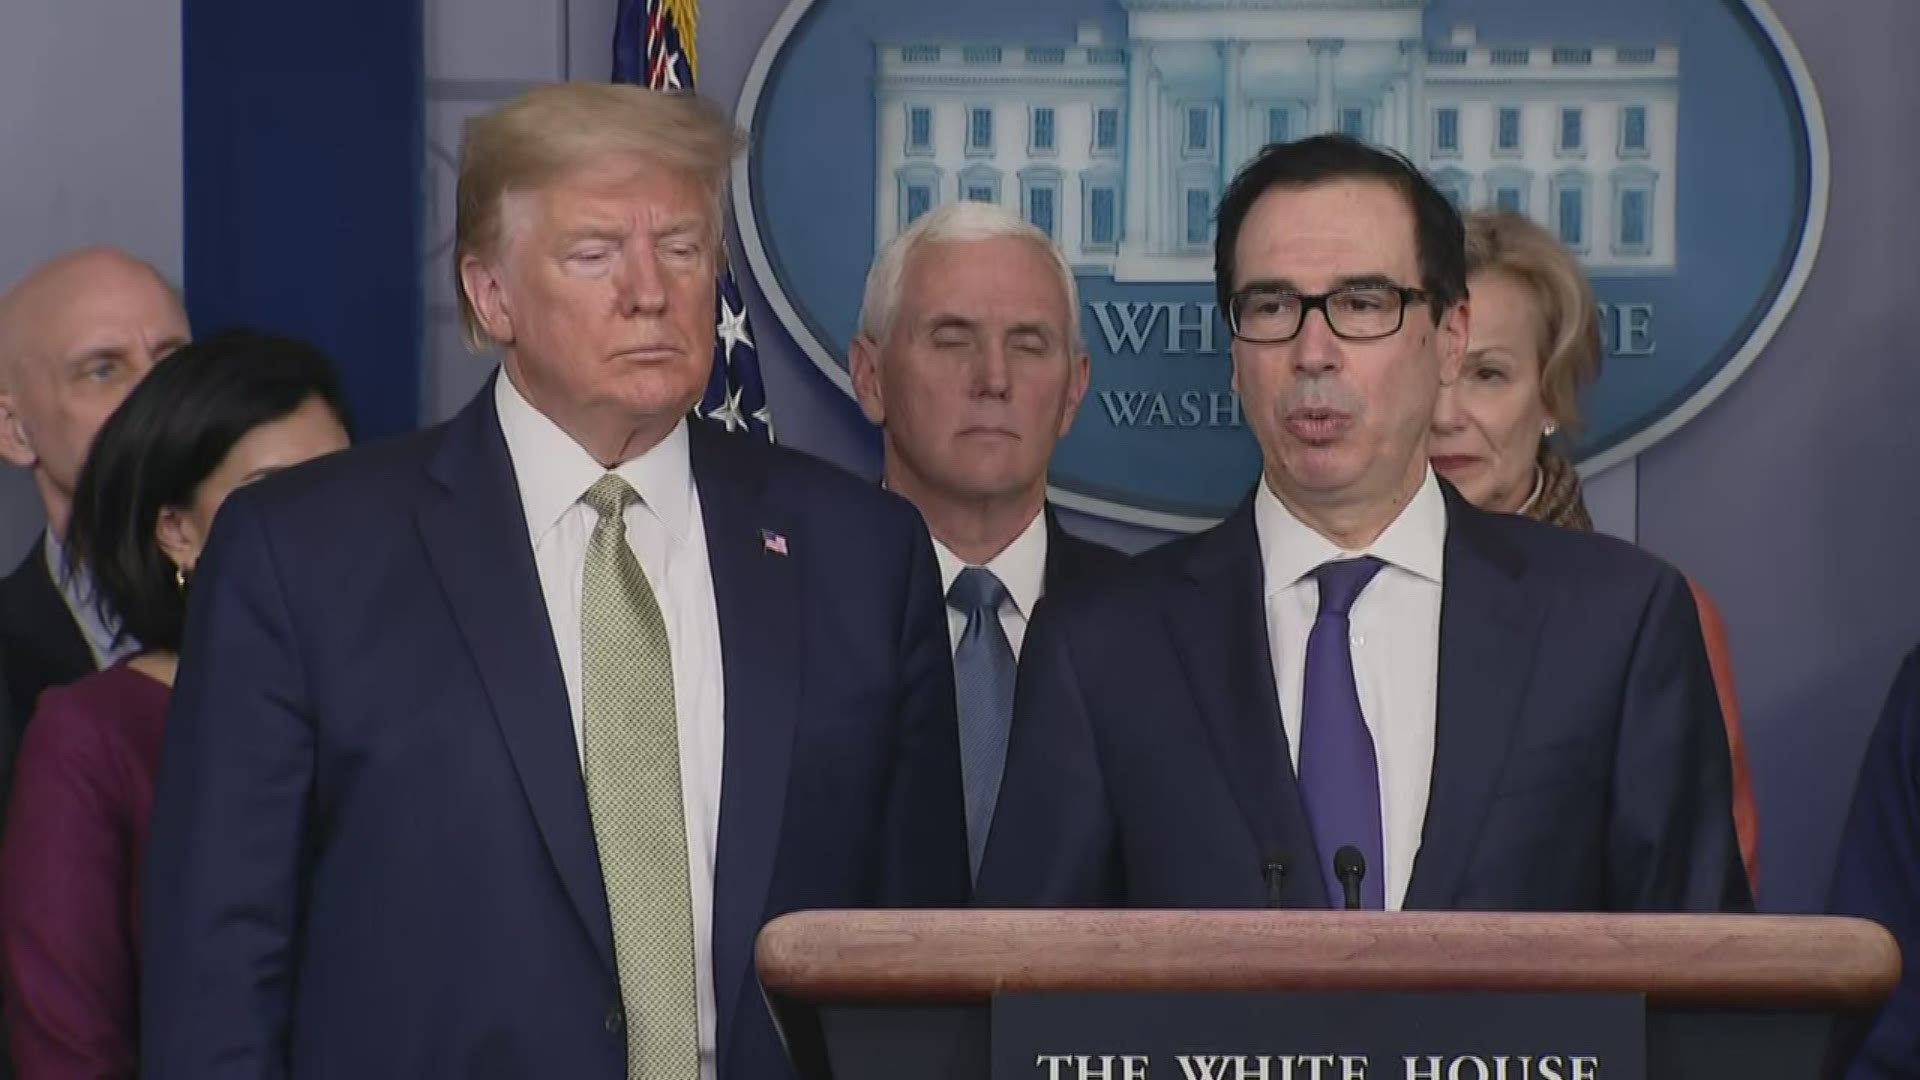 Treasury Secretary Steve Mnuchin says President Trump wants to send checks to Americans 'in next two weeks' in effort to curb economic cost of outbreak.